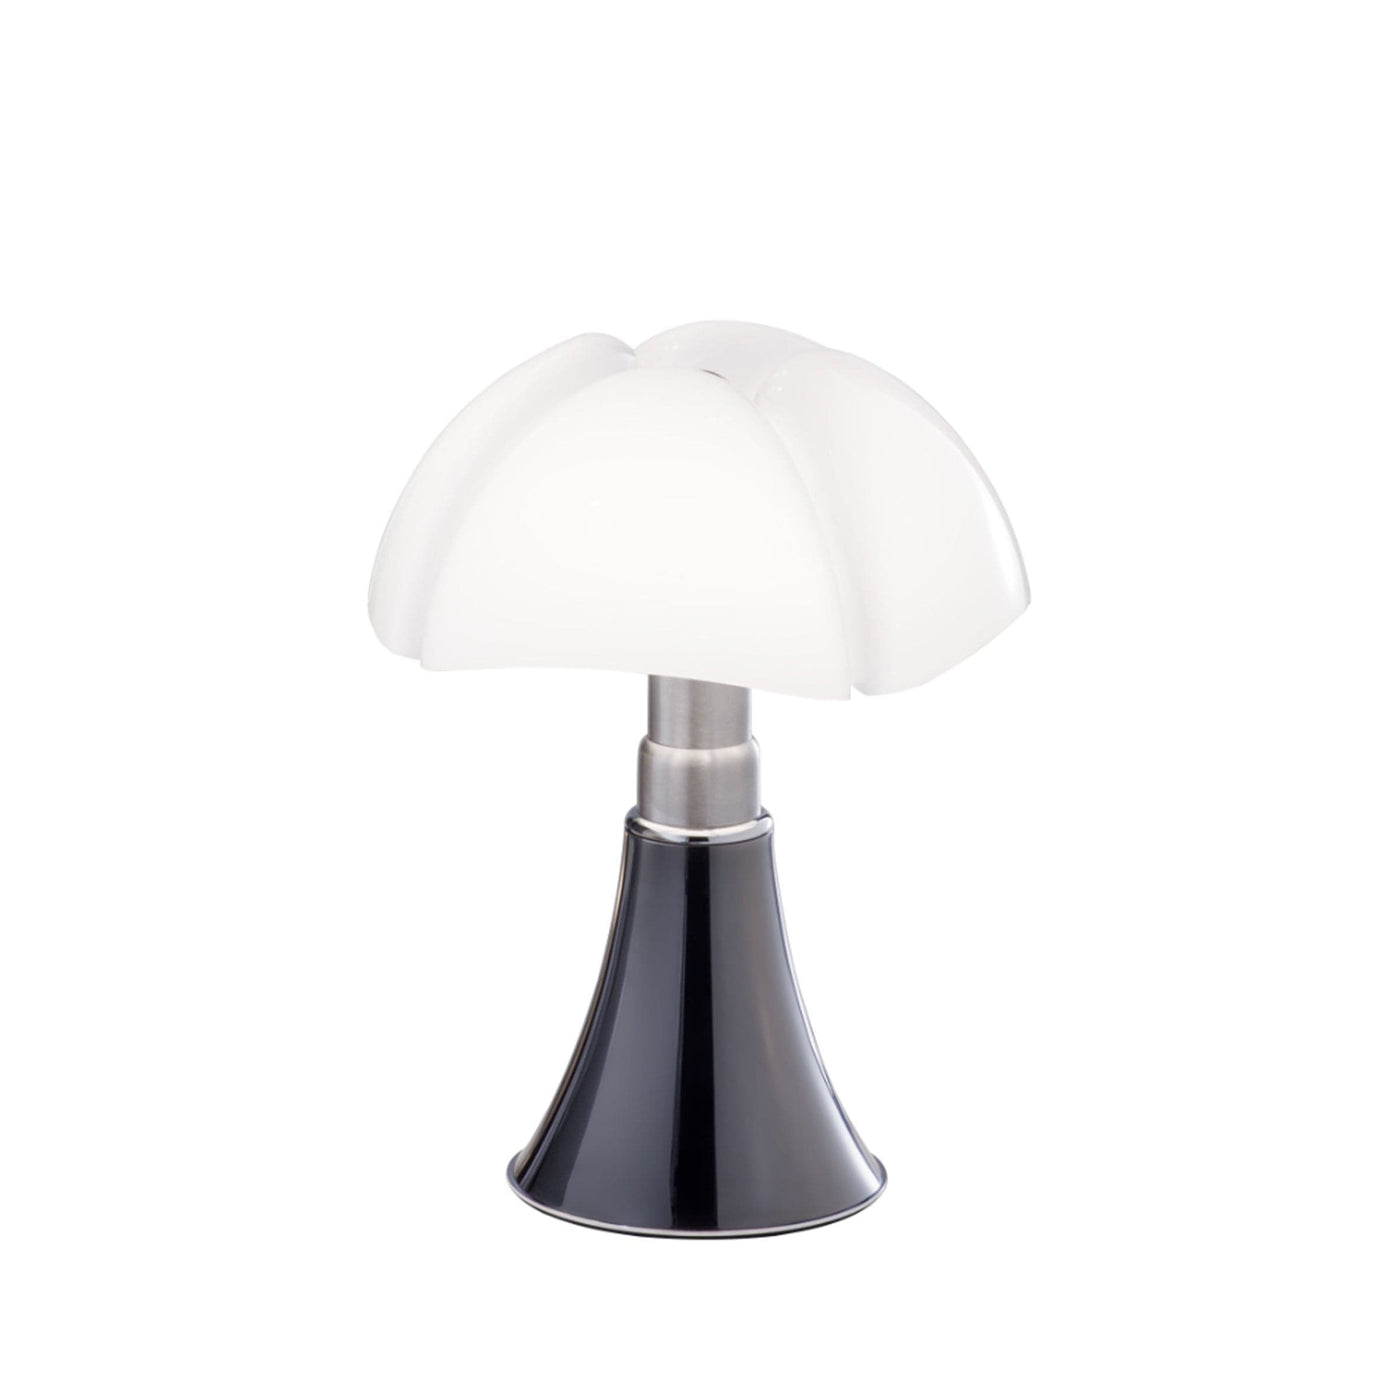 Table and Floor Lamp PIPISTRELLO 66-86 cm by Gae Aulenti 021